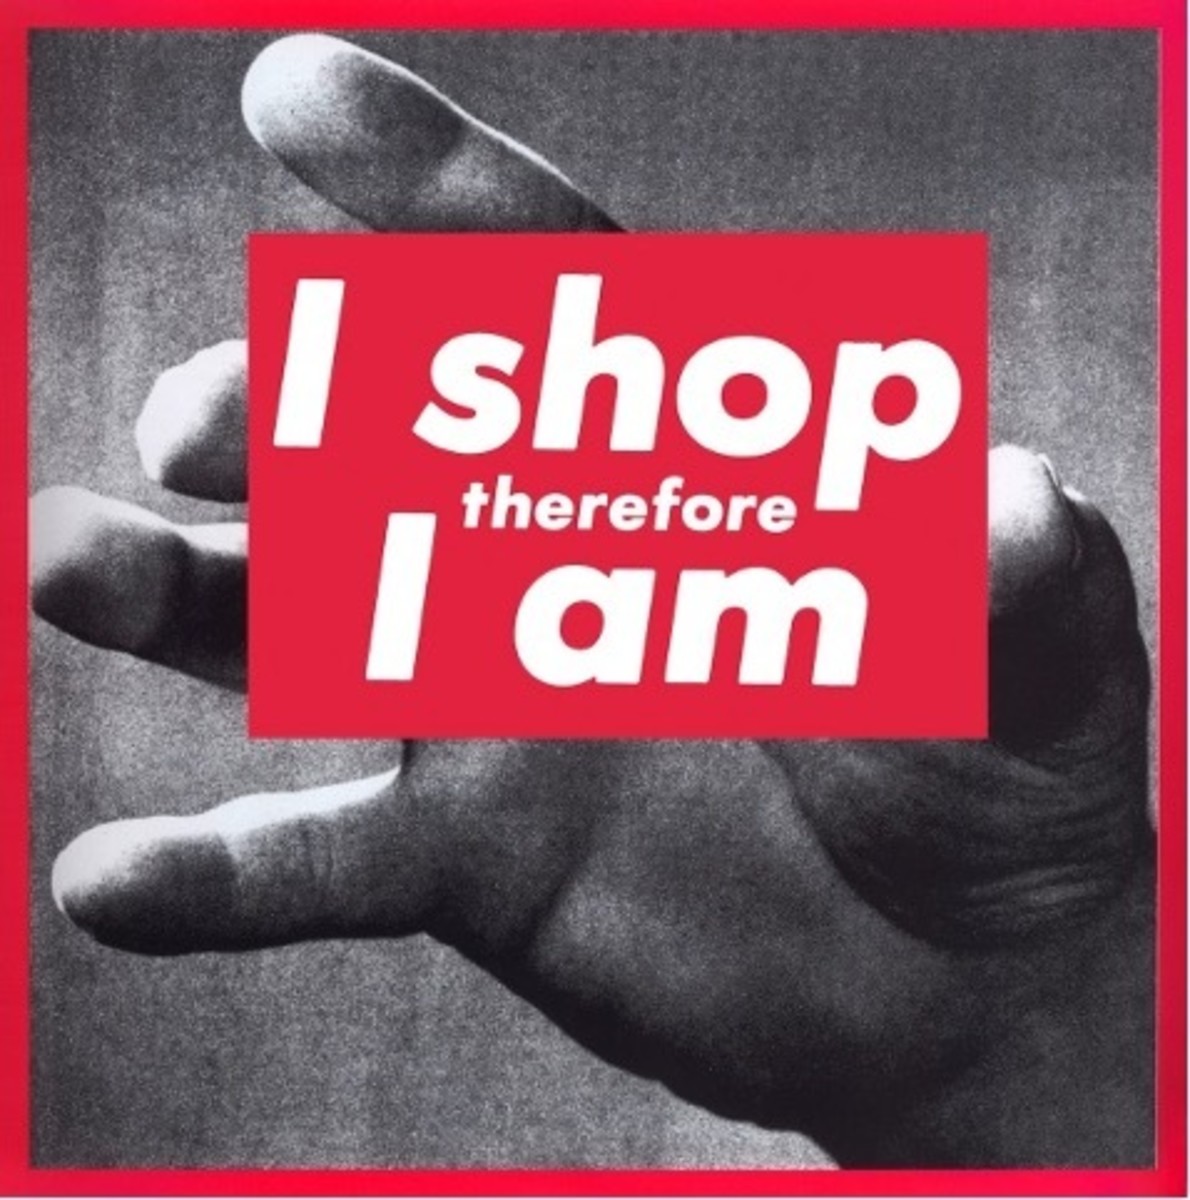 barbara-kruger-in-relation-to-ideology-and-consumerism